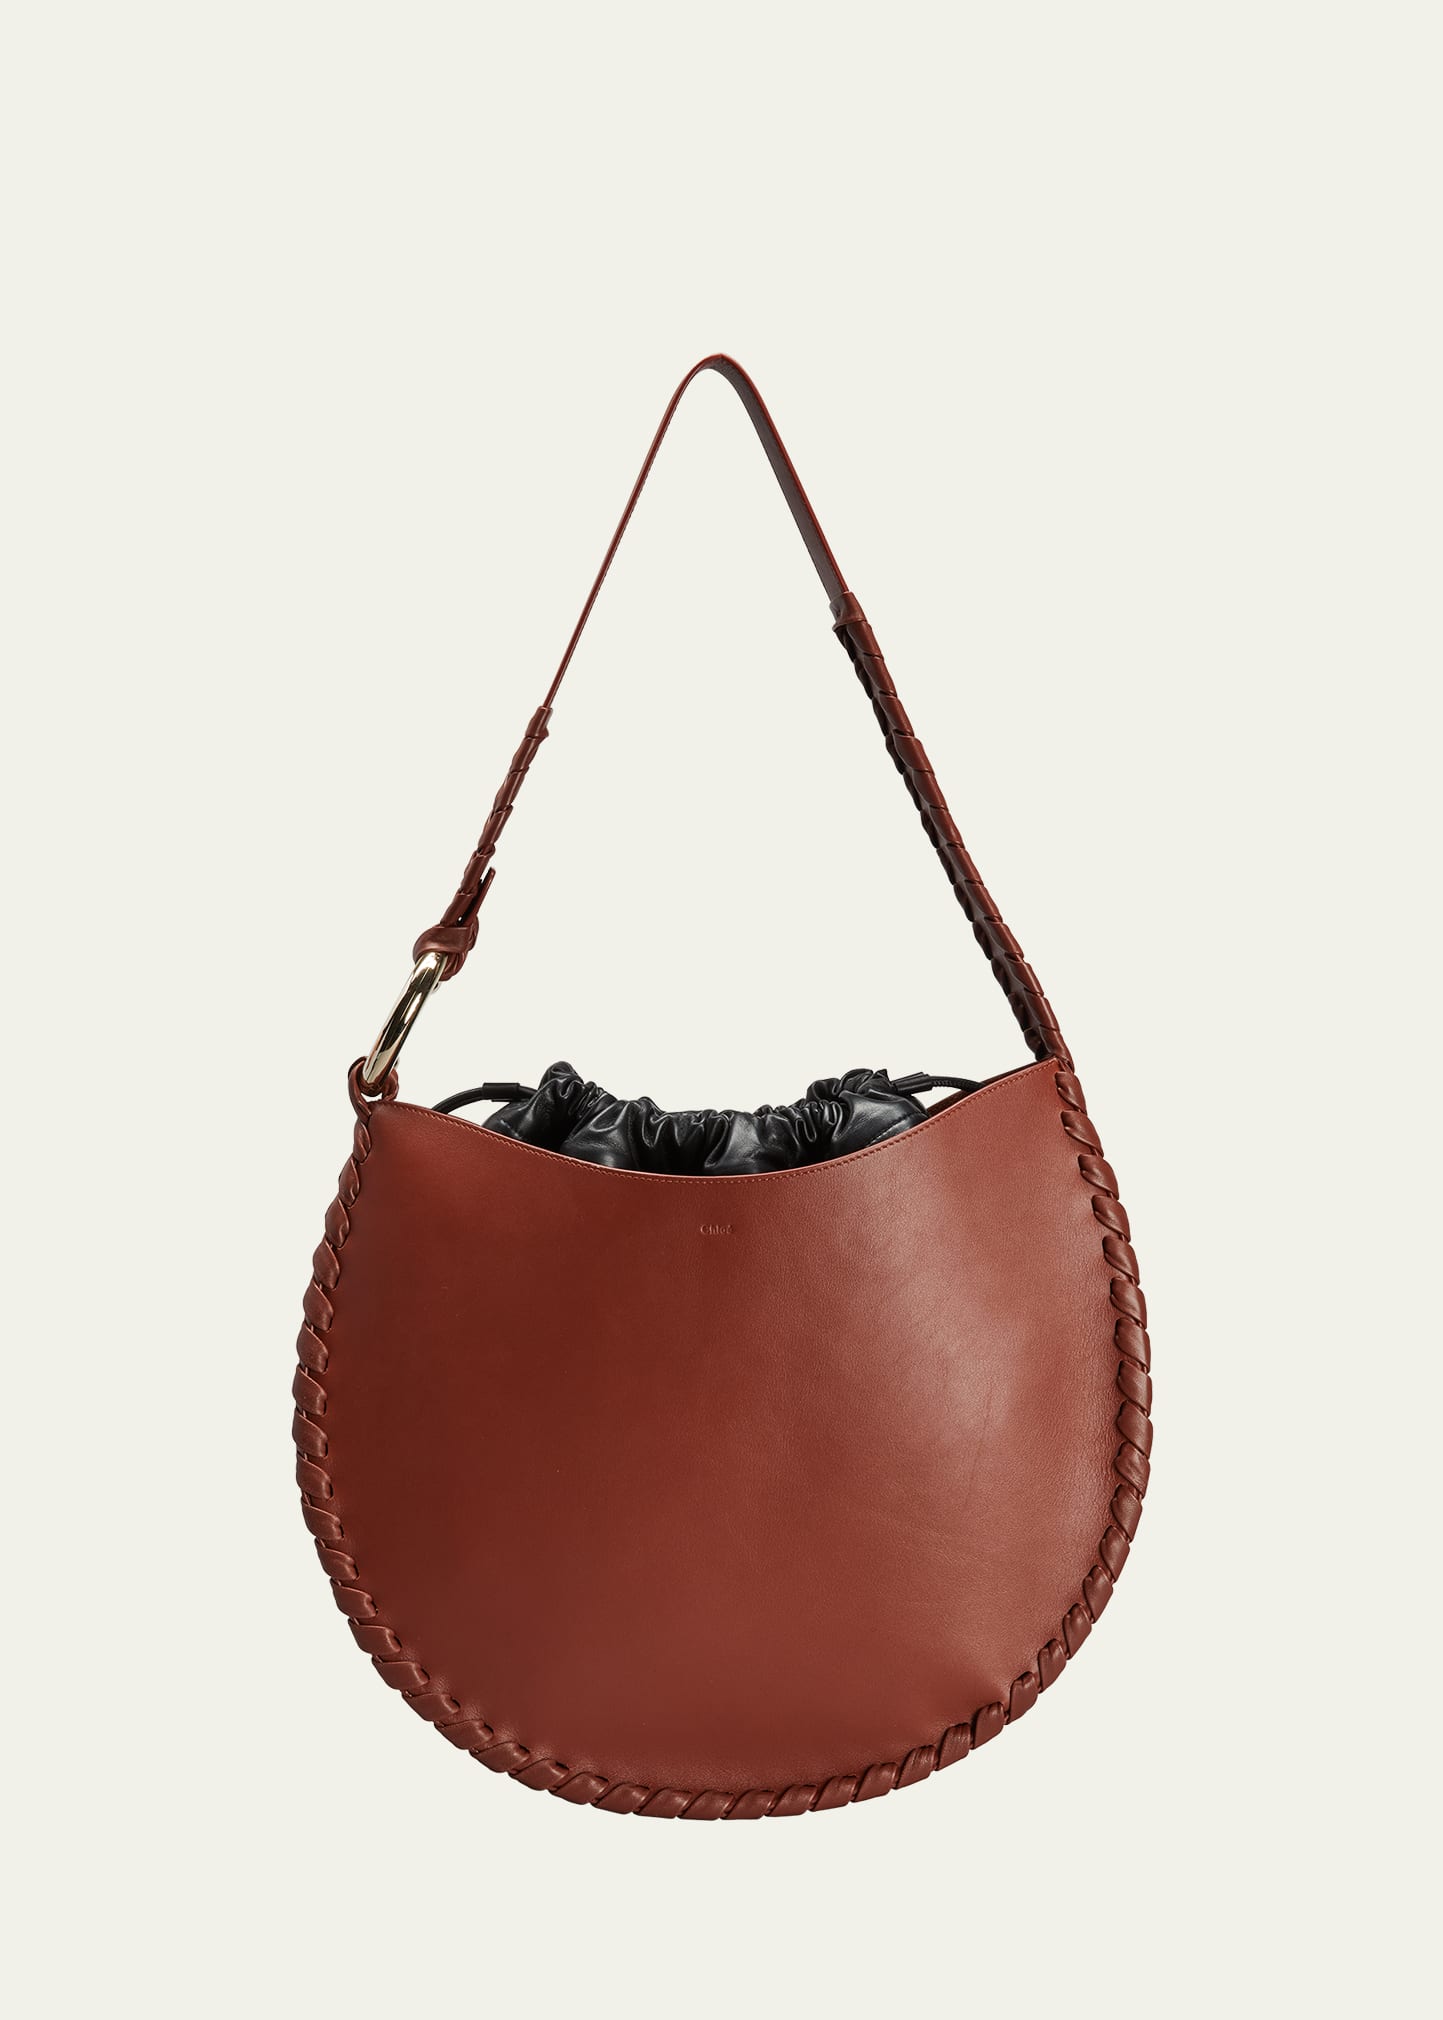 Chloé Mate Large Woven Leather Drawstring Hobo Bag In 27s Sepia Brown